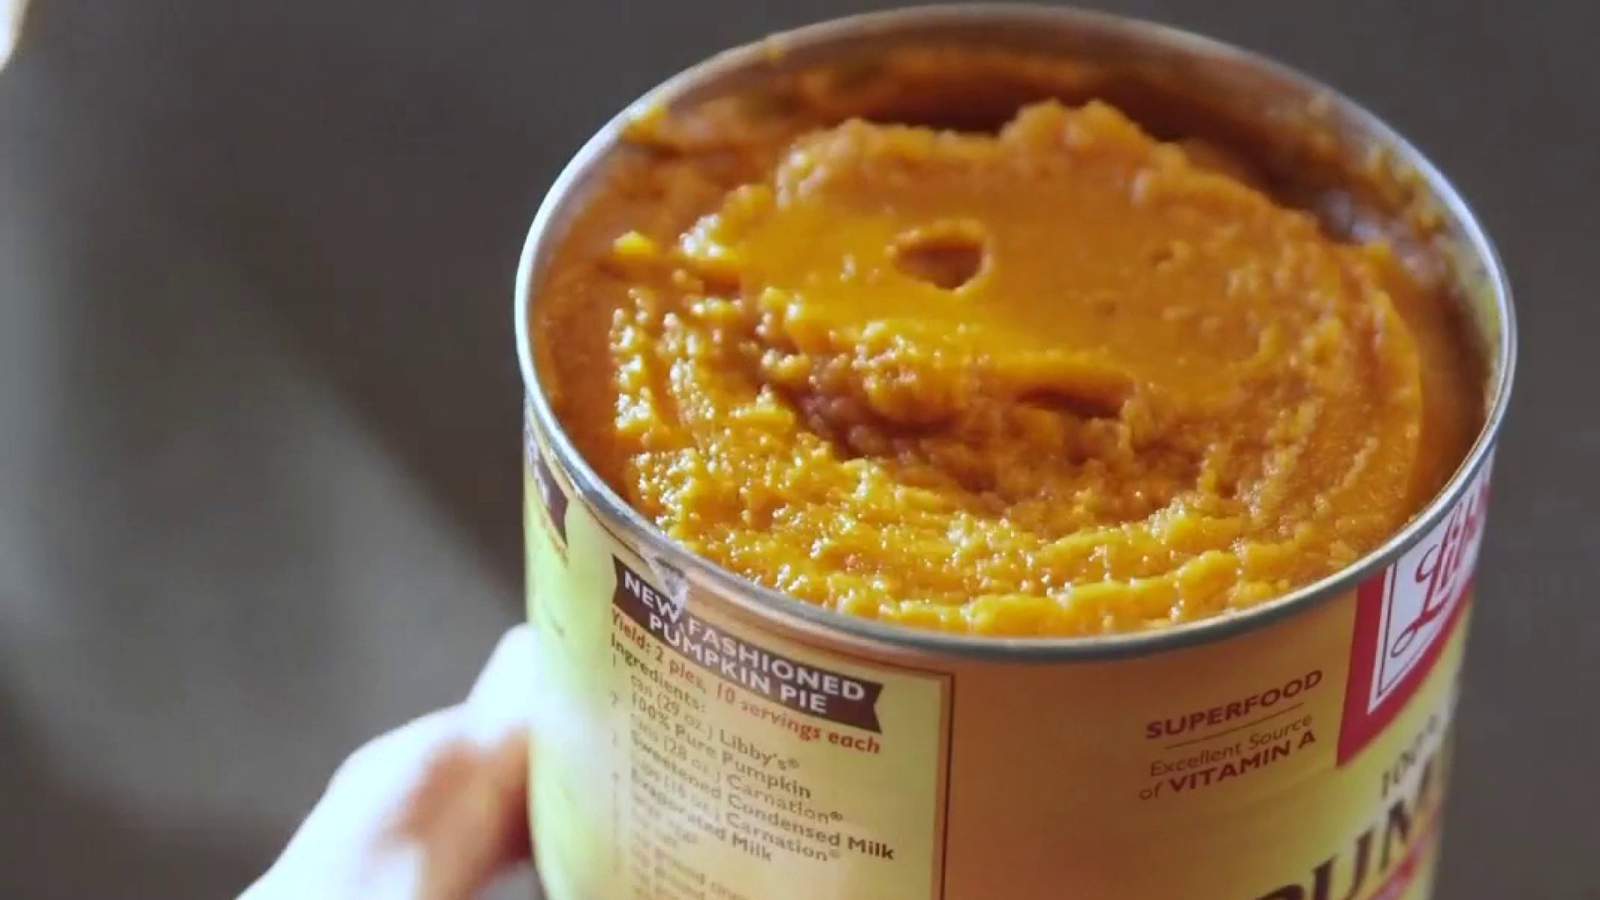 What’s in canned pumpkin?